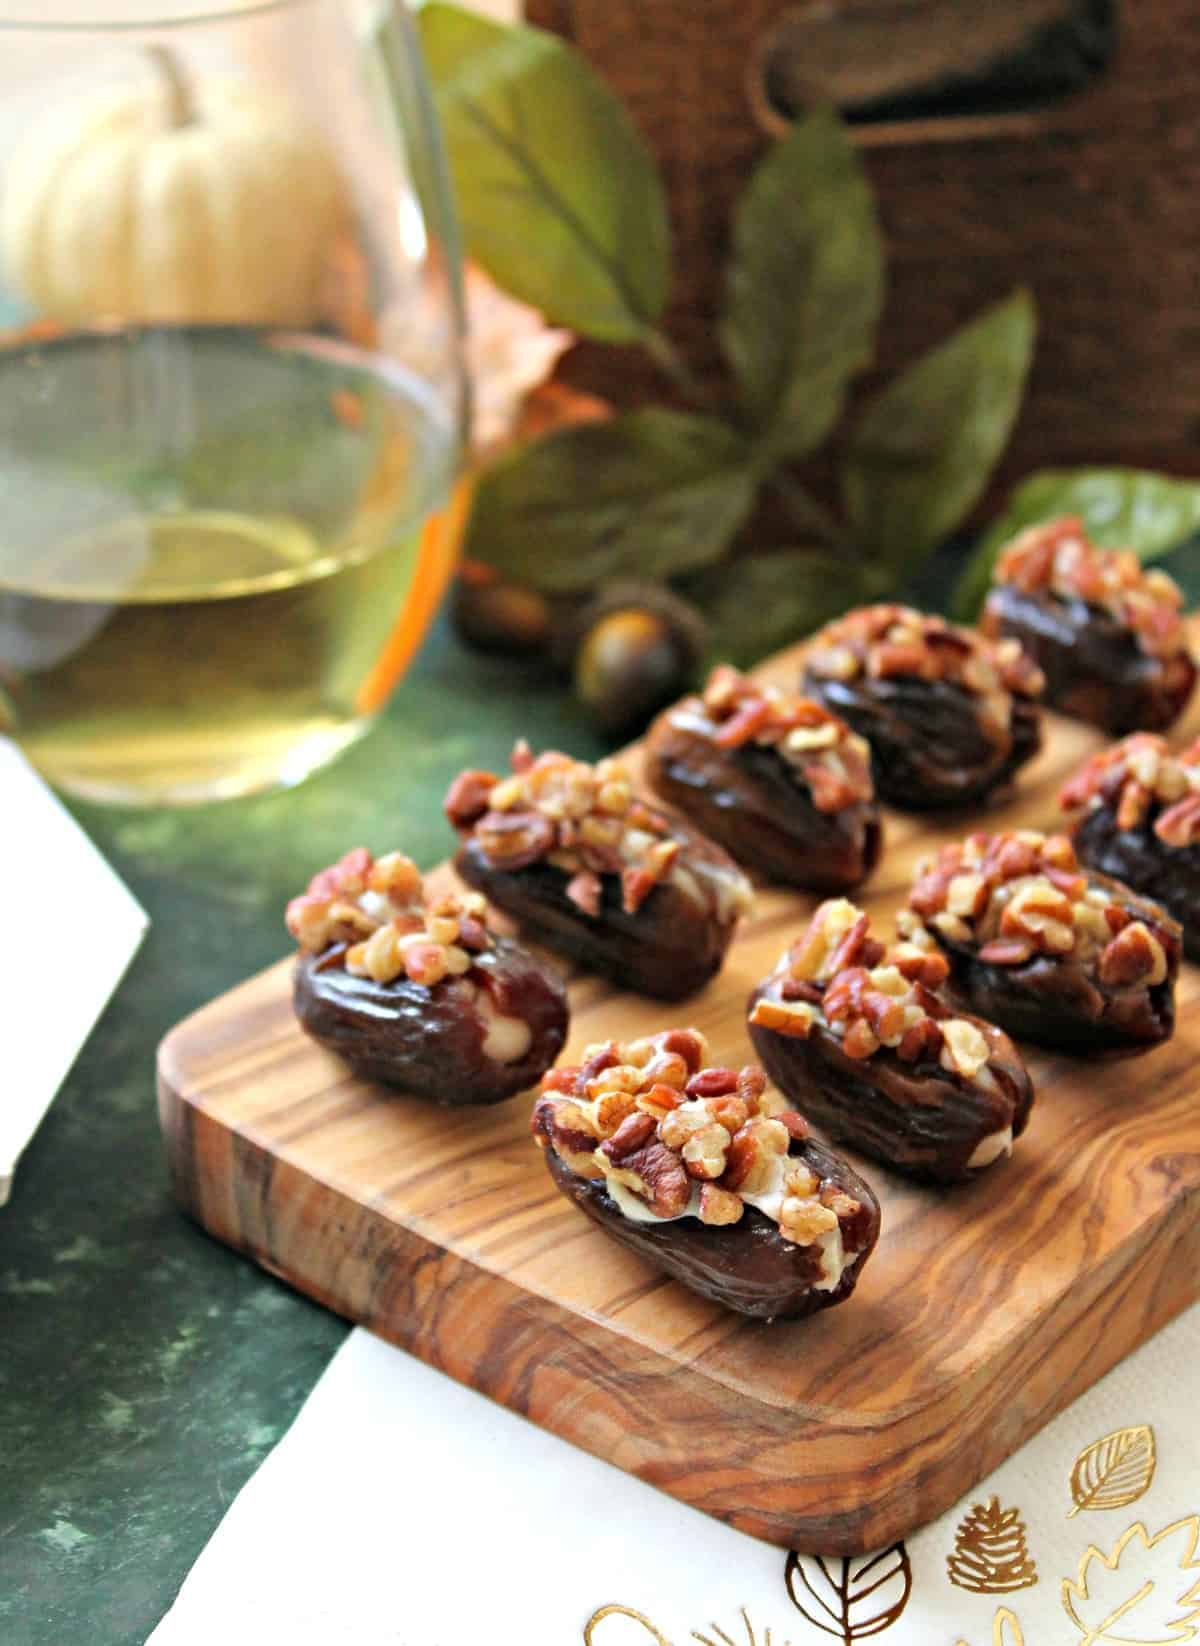 Honey-Cinnamon Cream Cheese Stuffed Dates! Sweet, sticky dates are stuffed full of honey-sweetened, cinnamon-spiced cream cheese, then rolled in crunchy roasted pecans. A perfect snack or appetizer to prepare last minute holiday entertaining! 